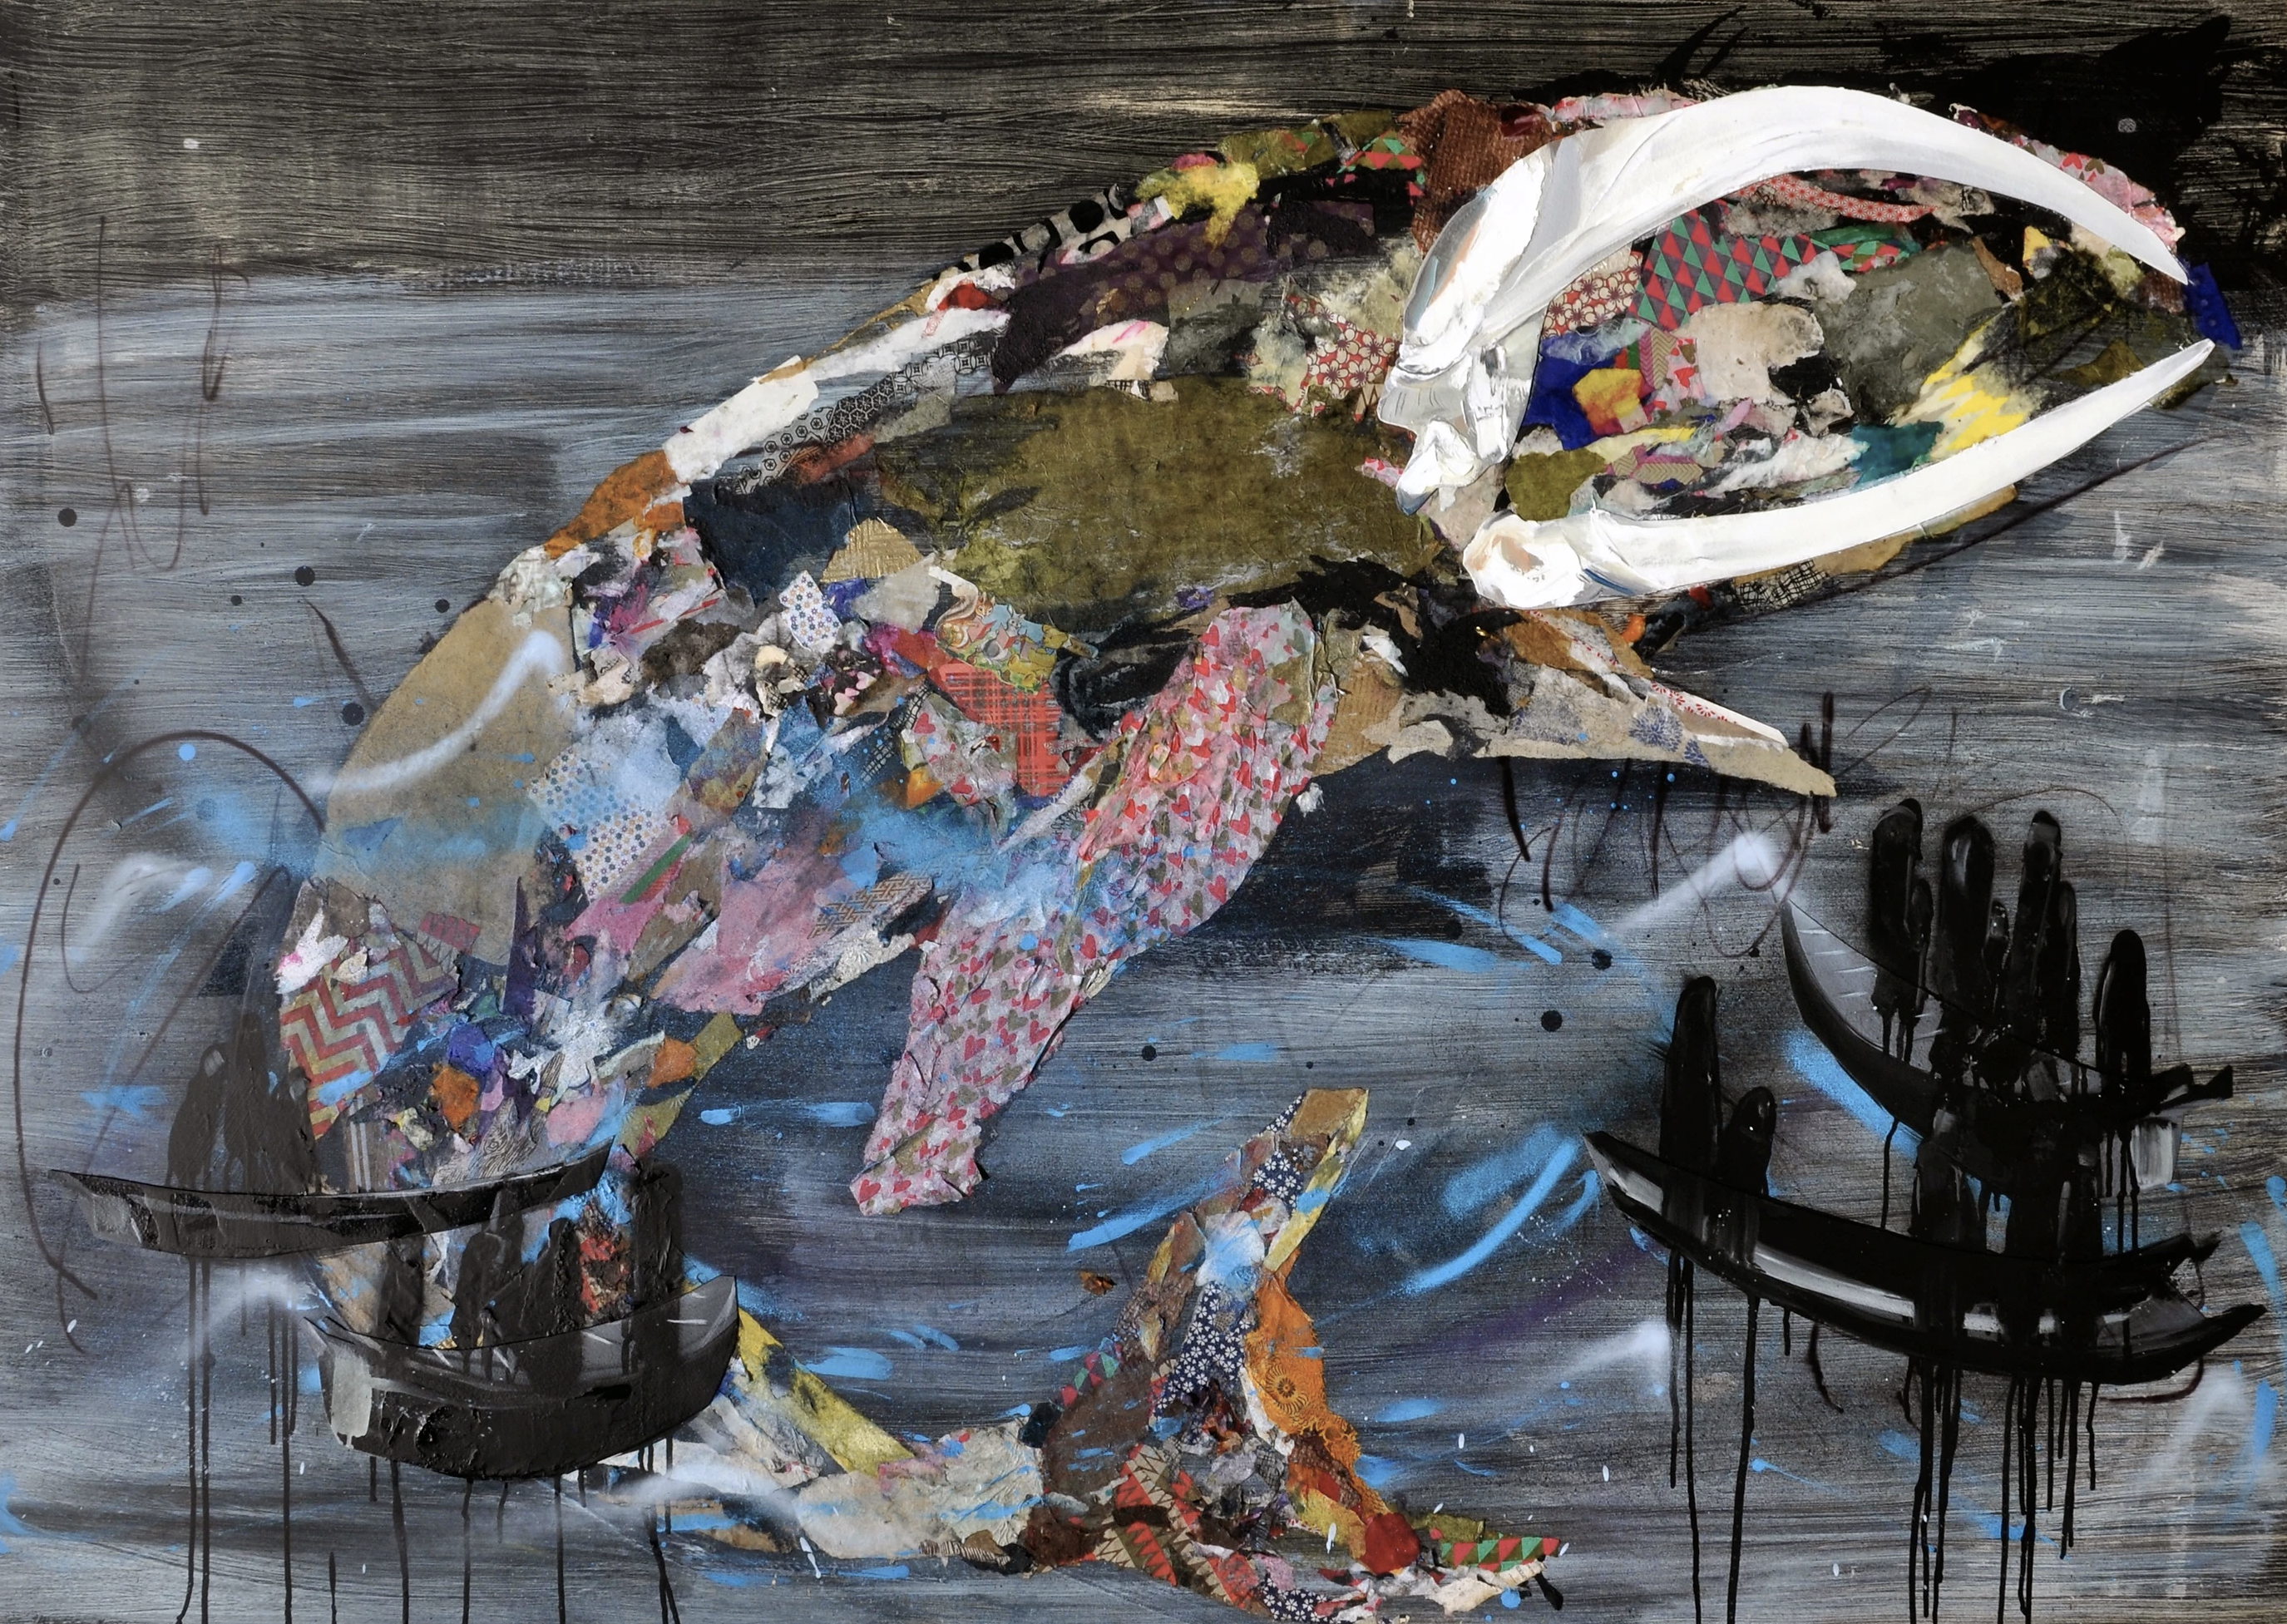 Bakekujira 2016 (44"x66") Mixed media collage and oil on panel board.